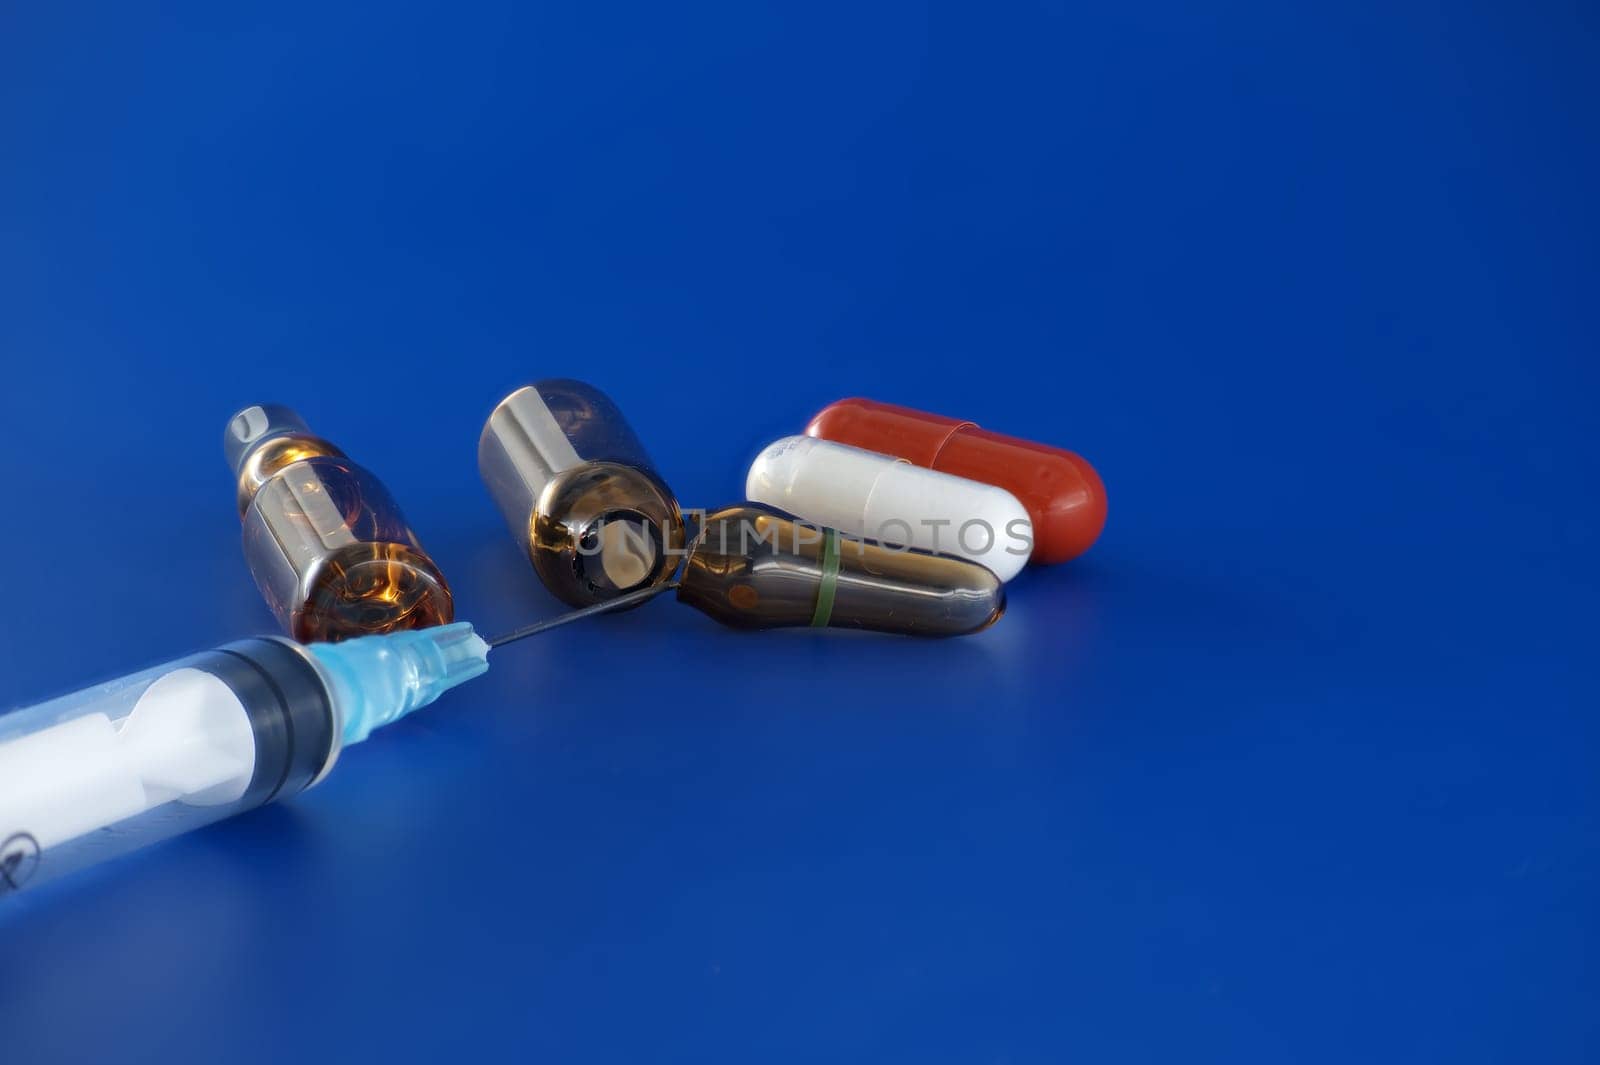 Syringe, ampoule and pills against a blue background, suggests oral medication as an alternative to the injectables